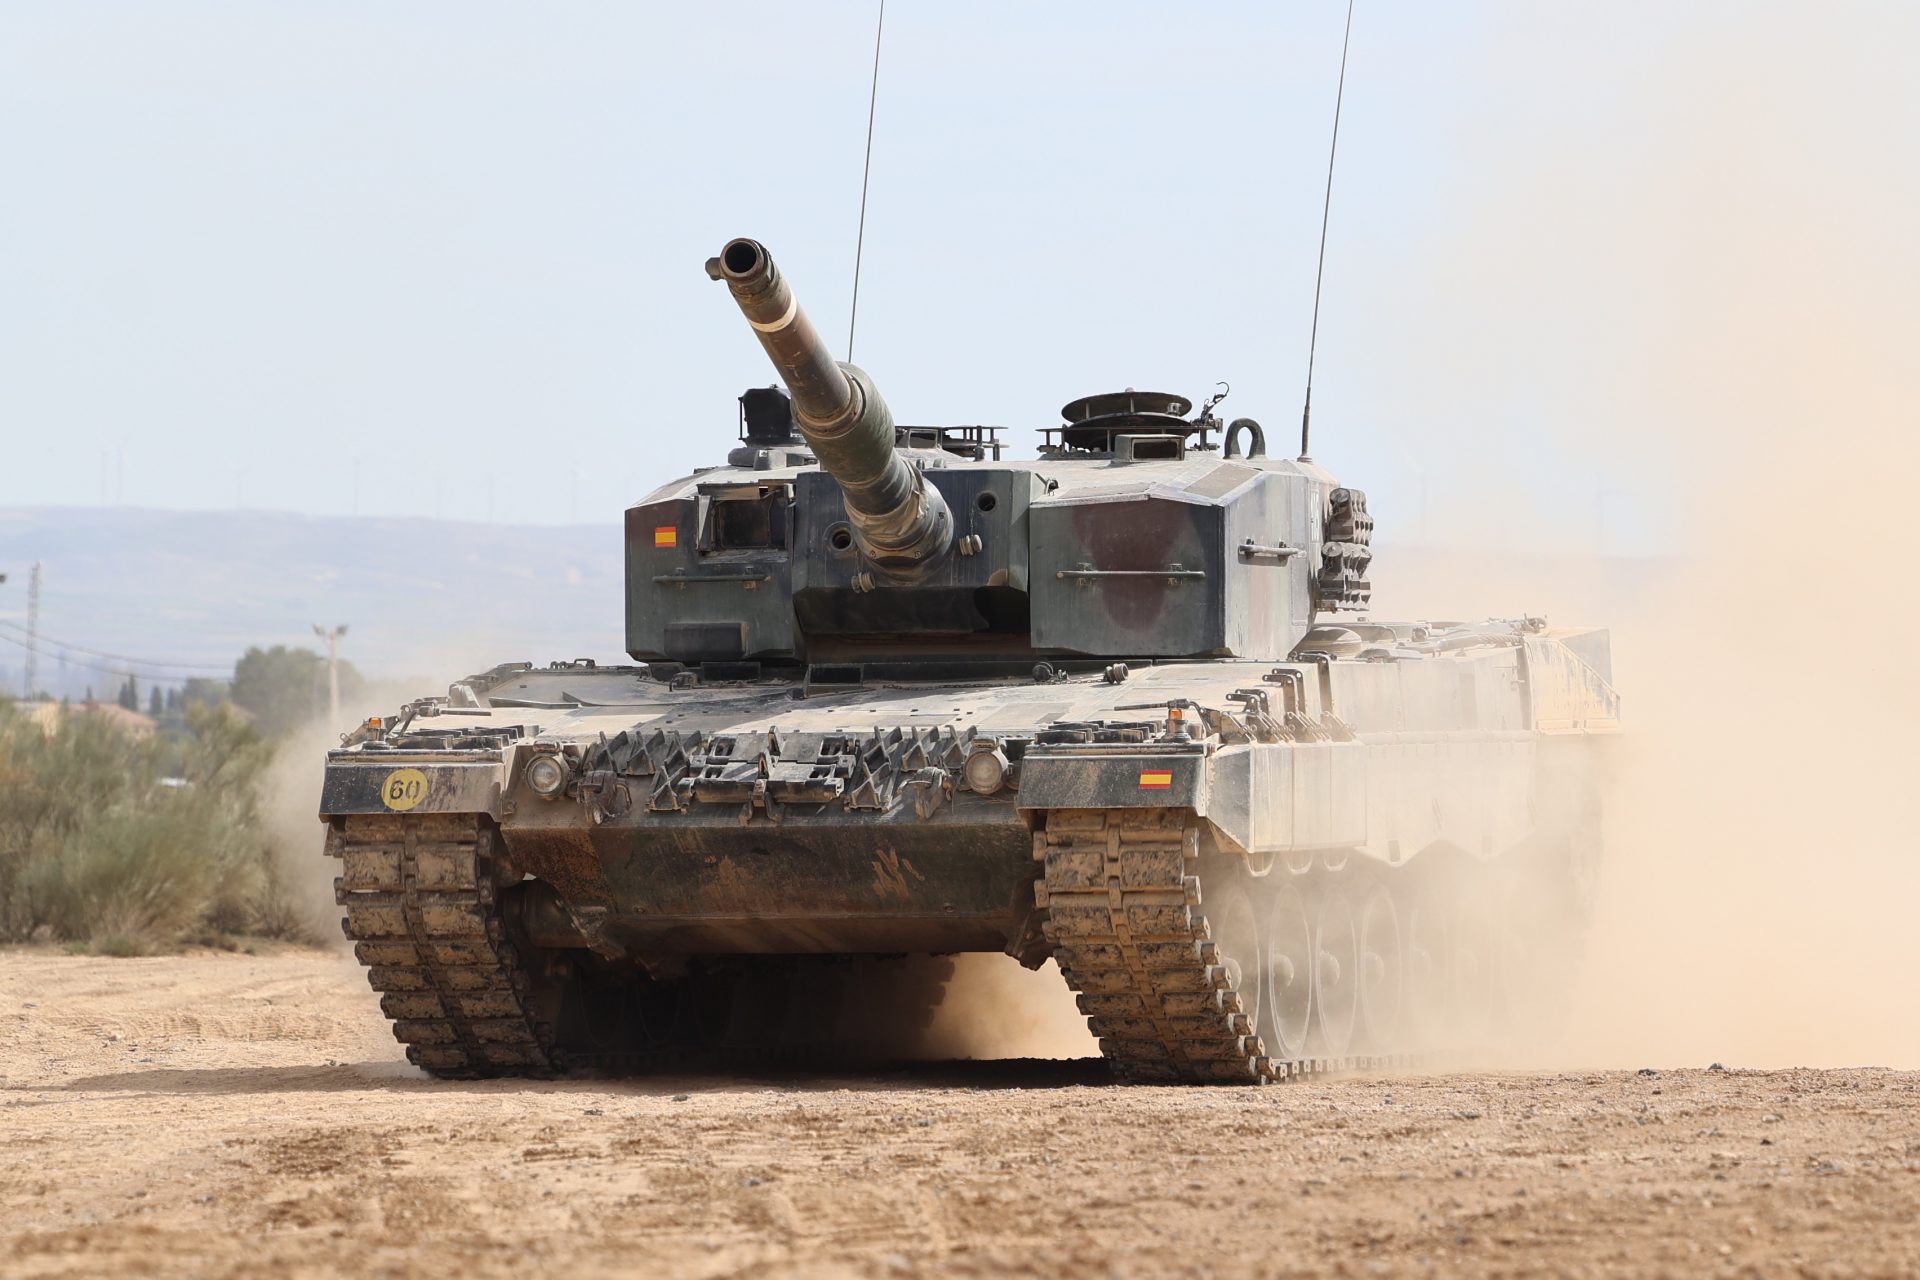 More Spanish tanks have been rumored for months